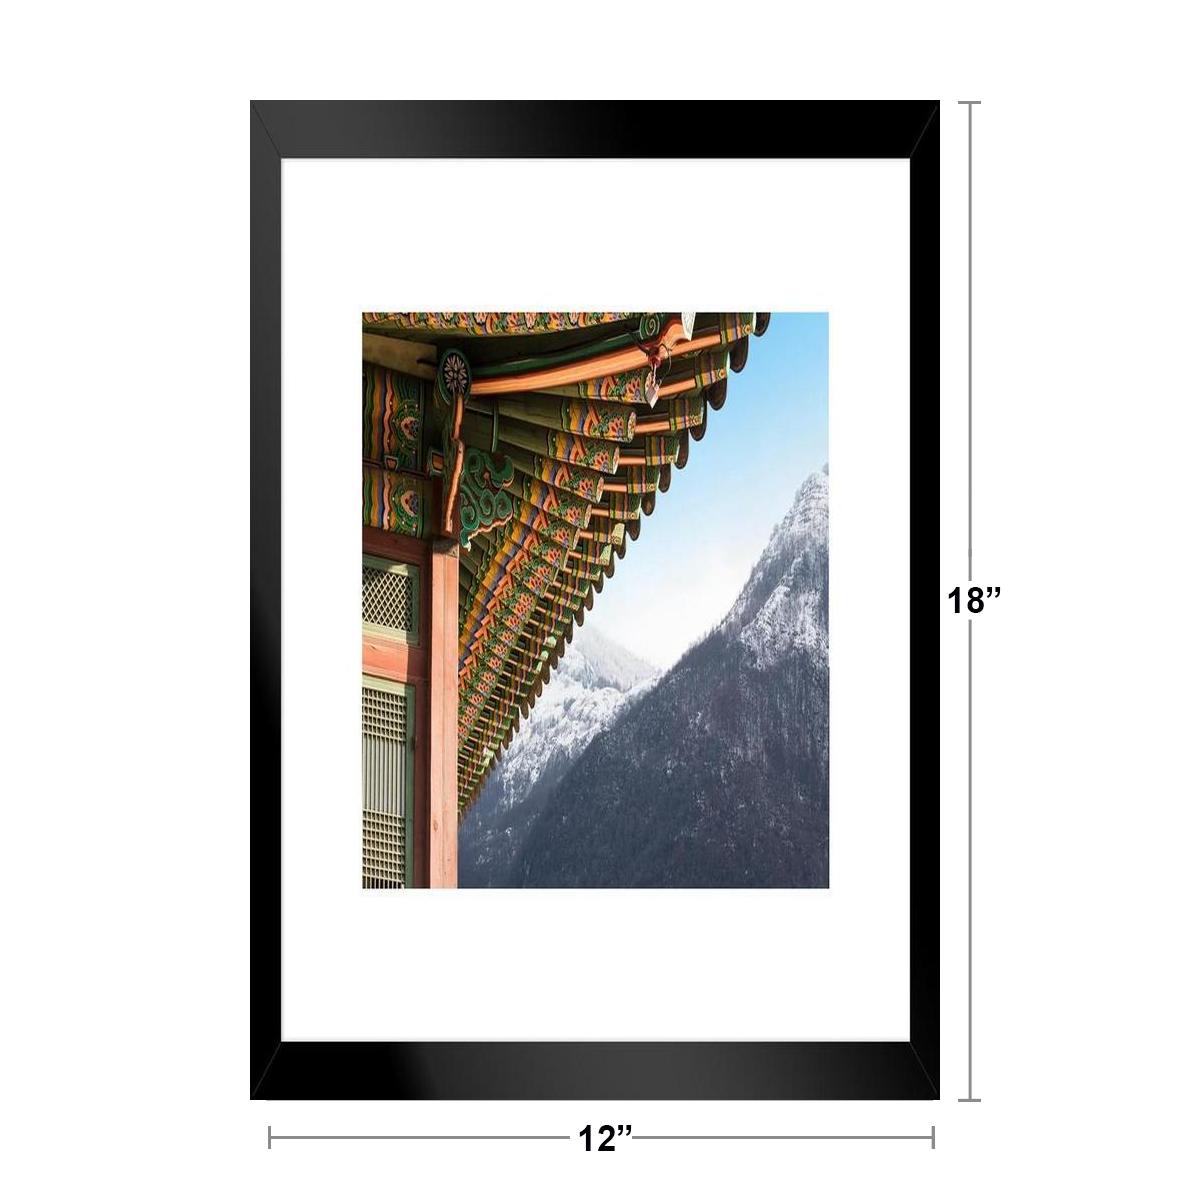 Traditional Korean Building South Korea Photography Matted Framed Art Print  Wall Decor 20x26 inch